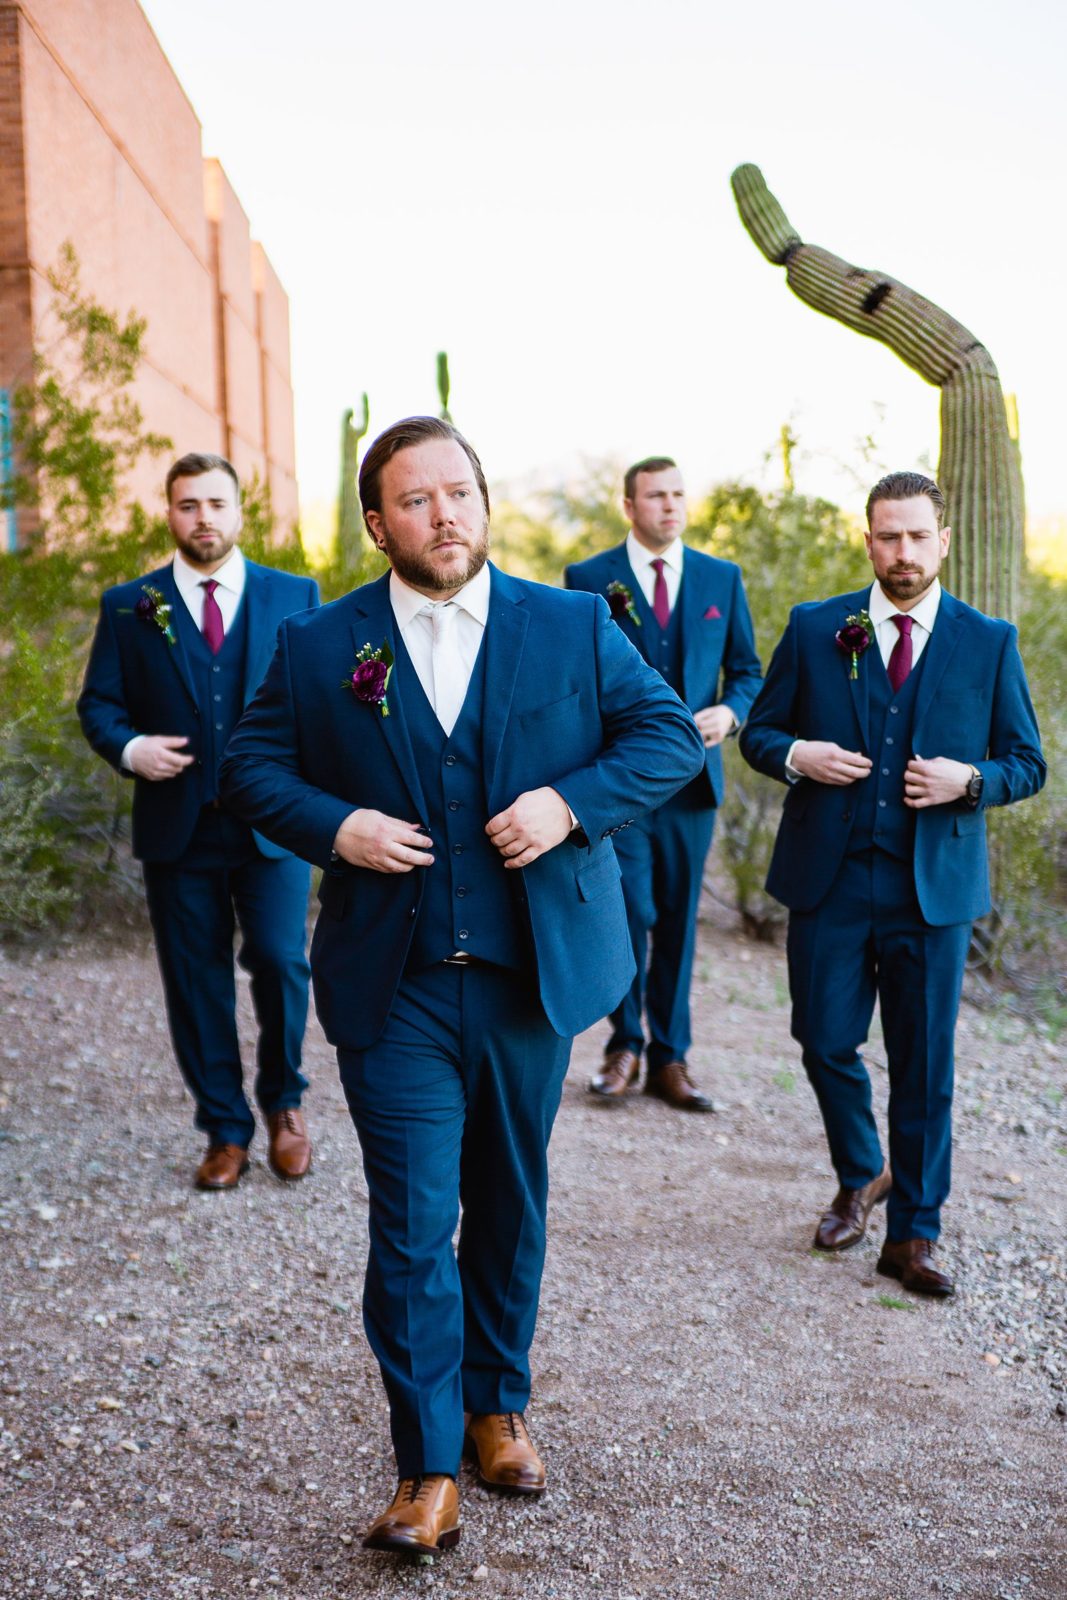 Groom and groomsmen walking together at a Arizona Heritage Center at Papago Park wedding by Arizona wedding photographer PMA Photography.